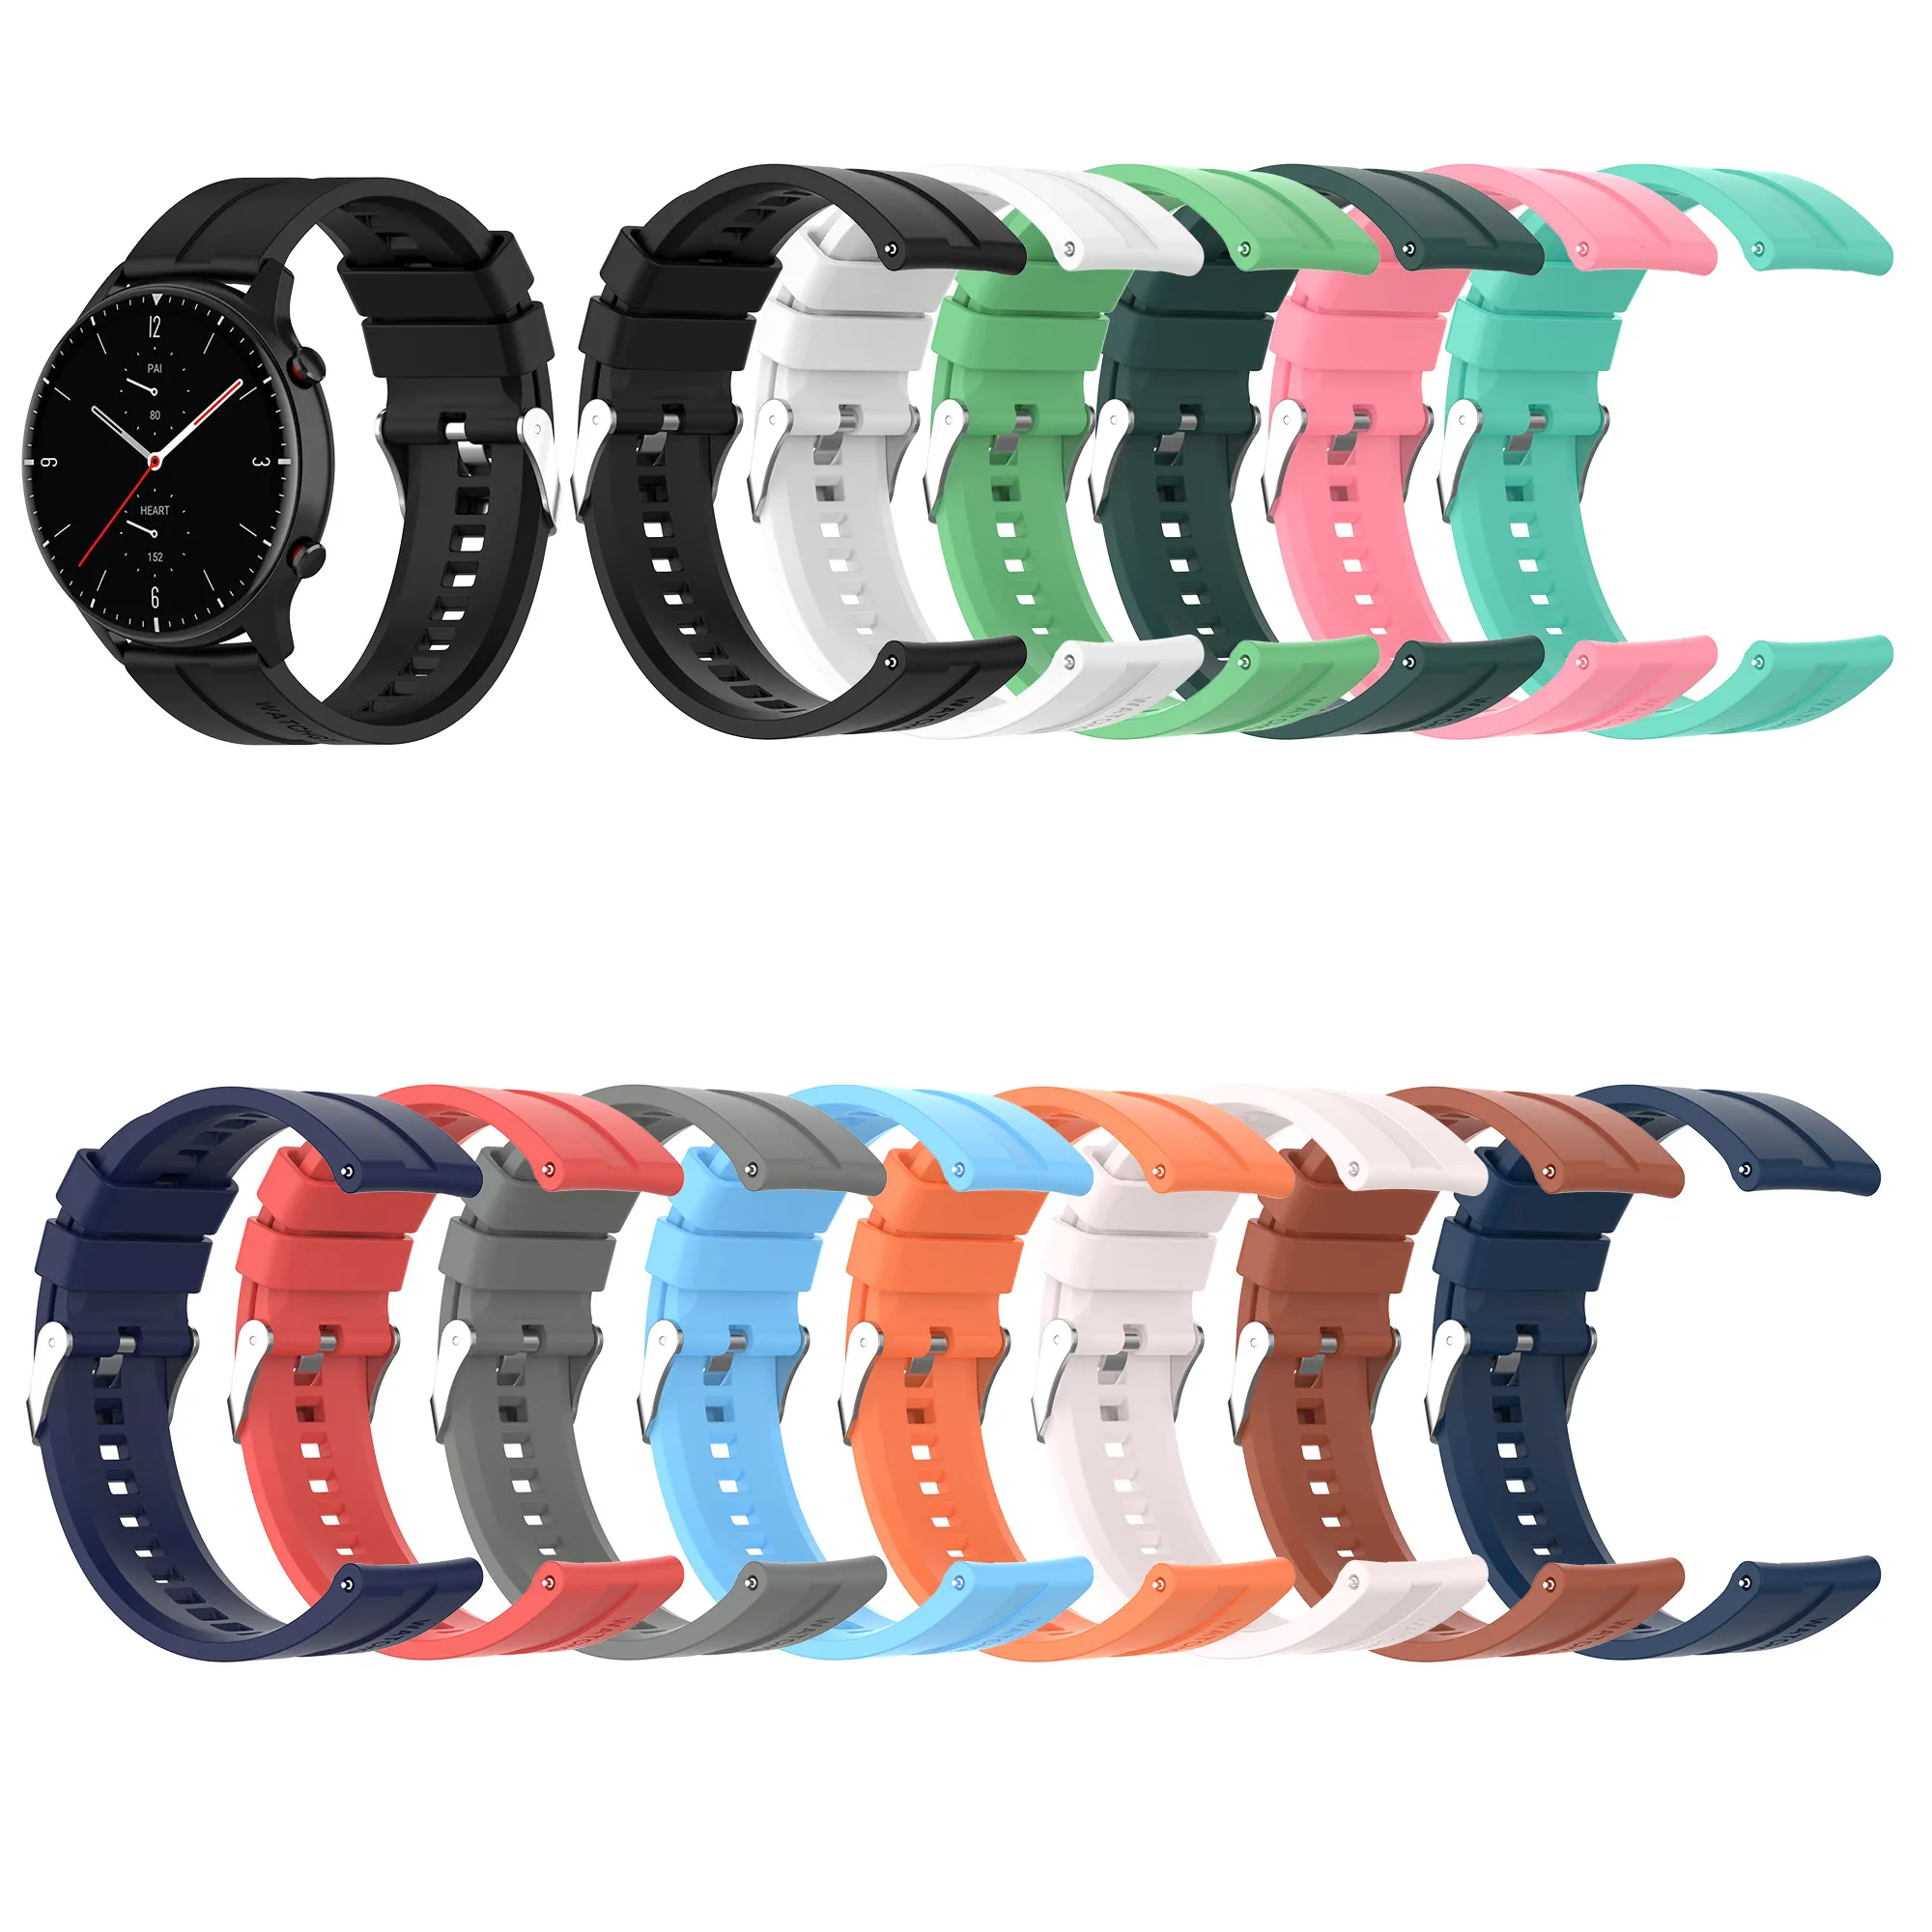 Tschick Silicone Strap For Huami Amazfit GTR 2e/GTR2 Universal Strap 22mm Replacement Watch Band Soft Watch Strap Watchstrap